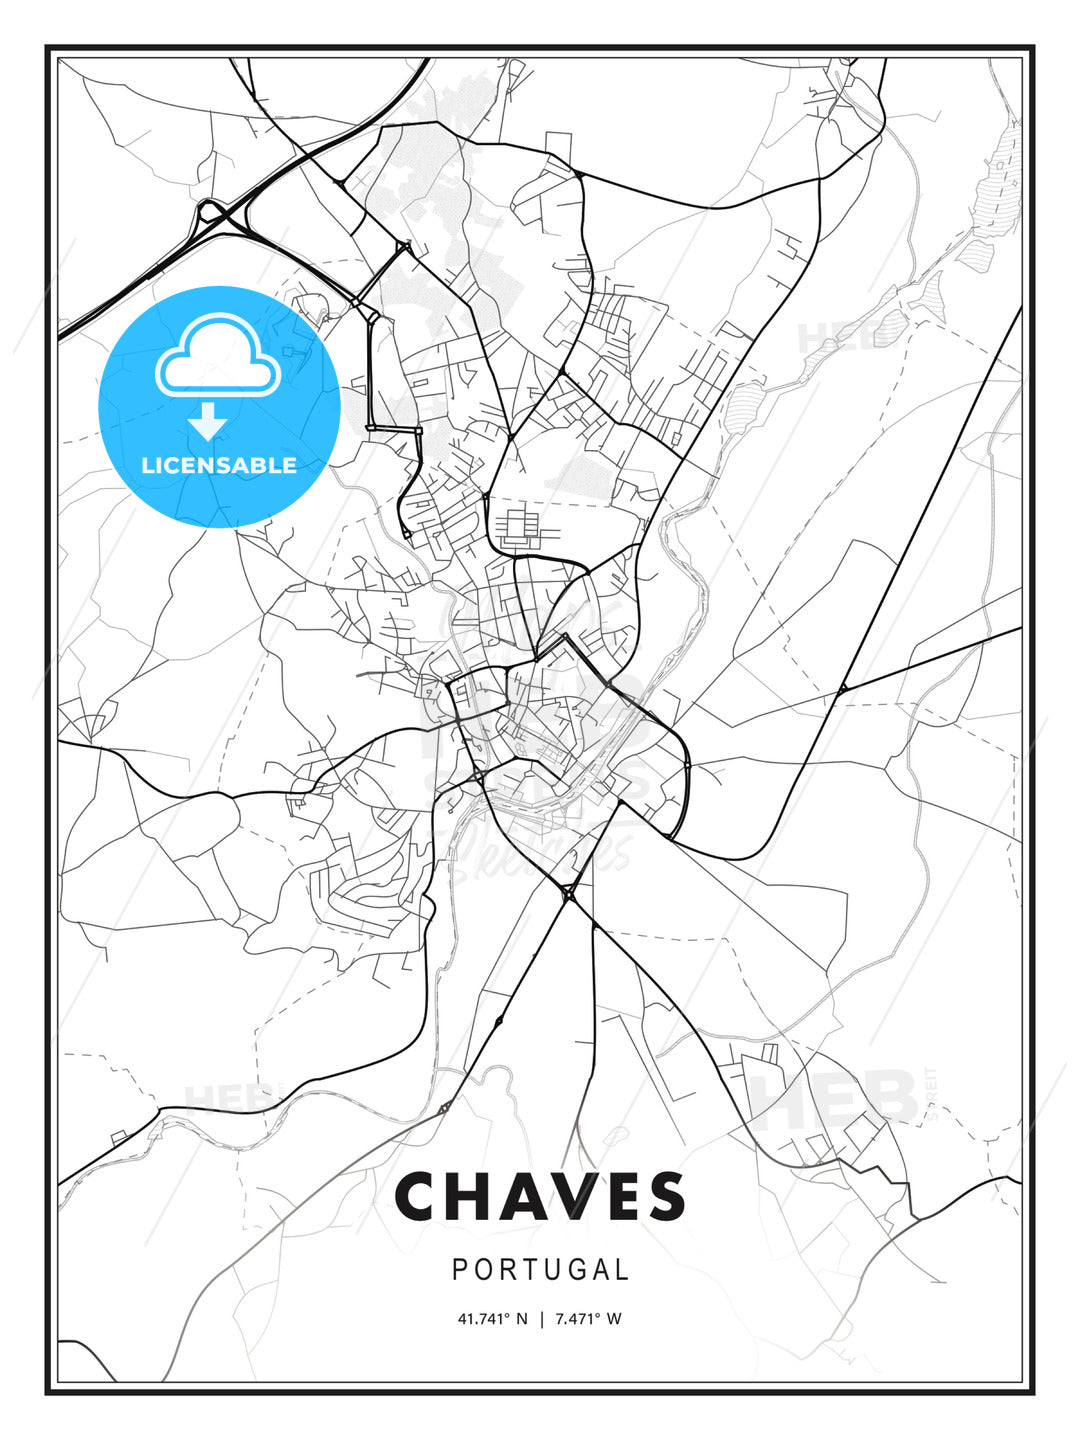 Chaves, Portugal, Modern Print Template in Various Formats - HEBSTREITS Sketches